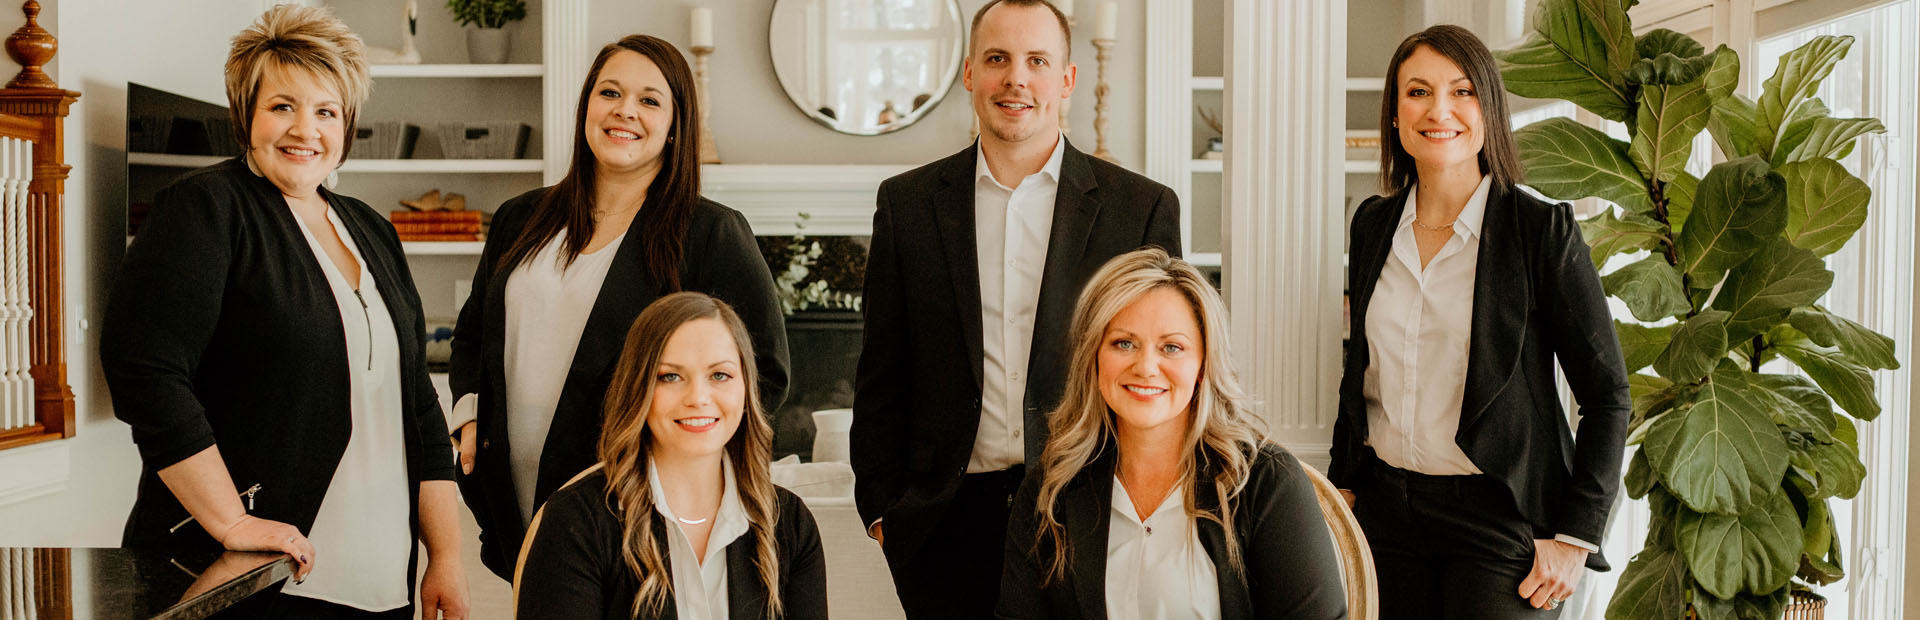 Rice Lake, WI Real Estate Agents